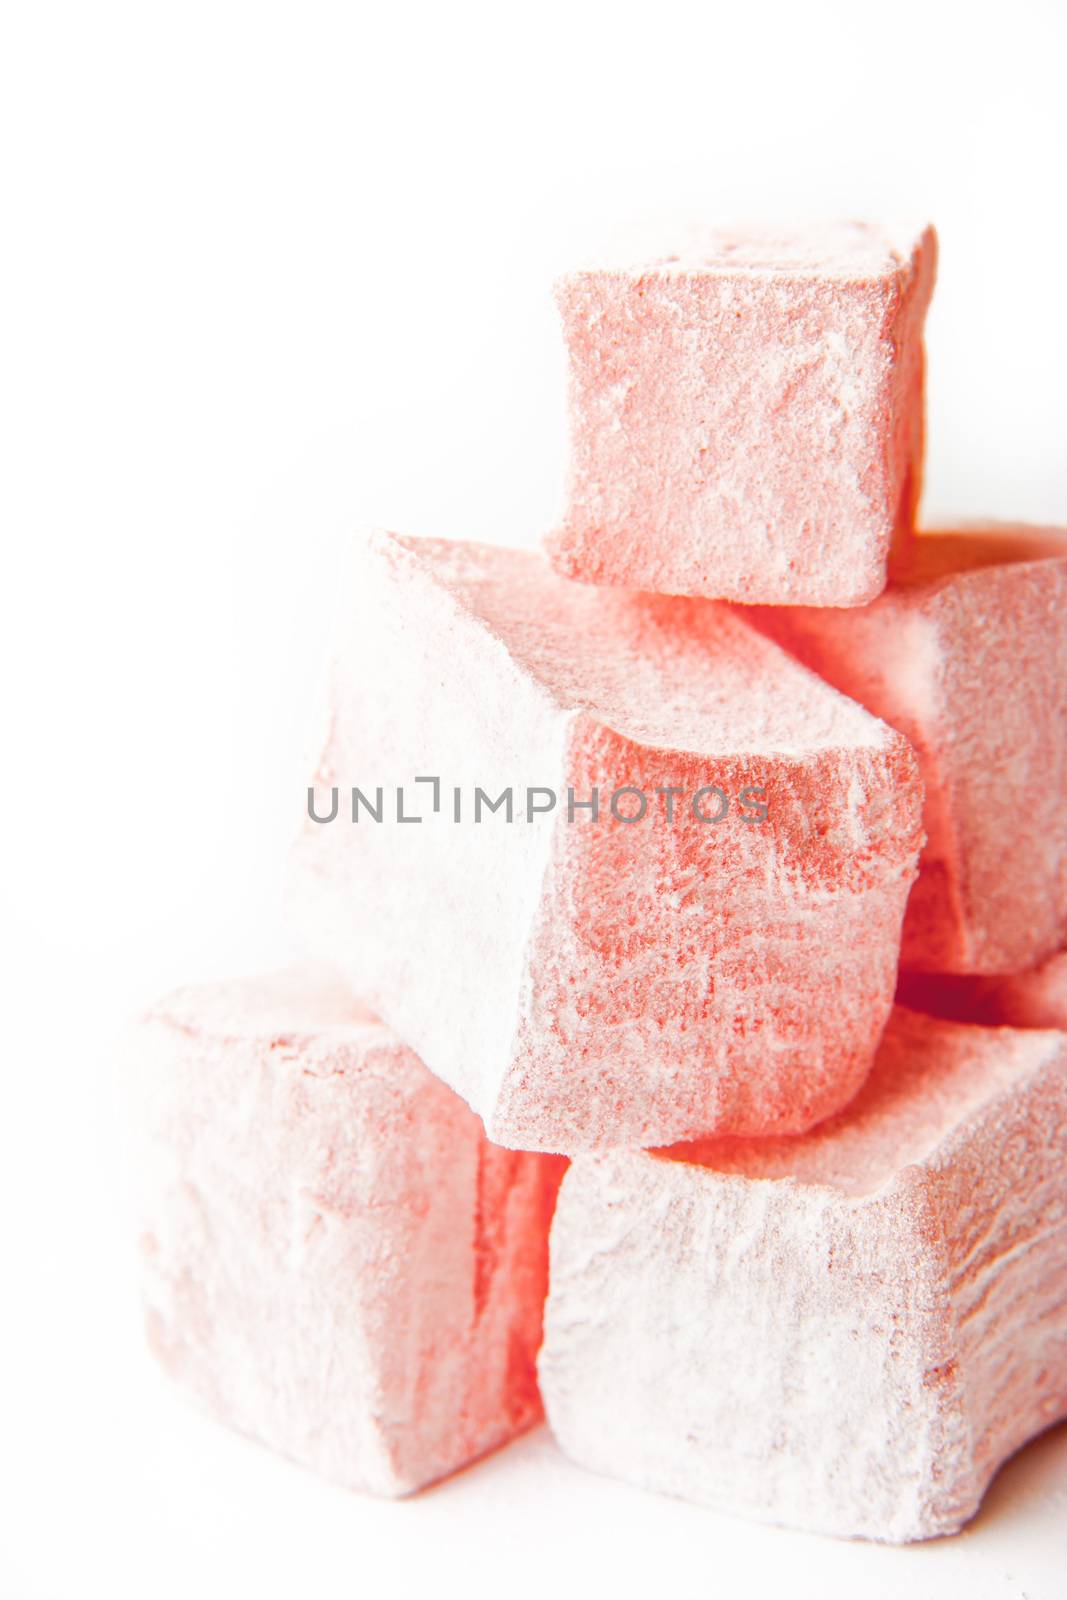 Pink Turkish delight on the white background vertical